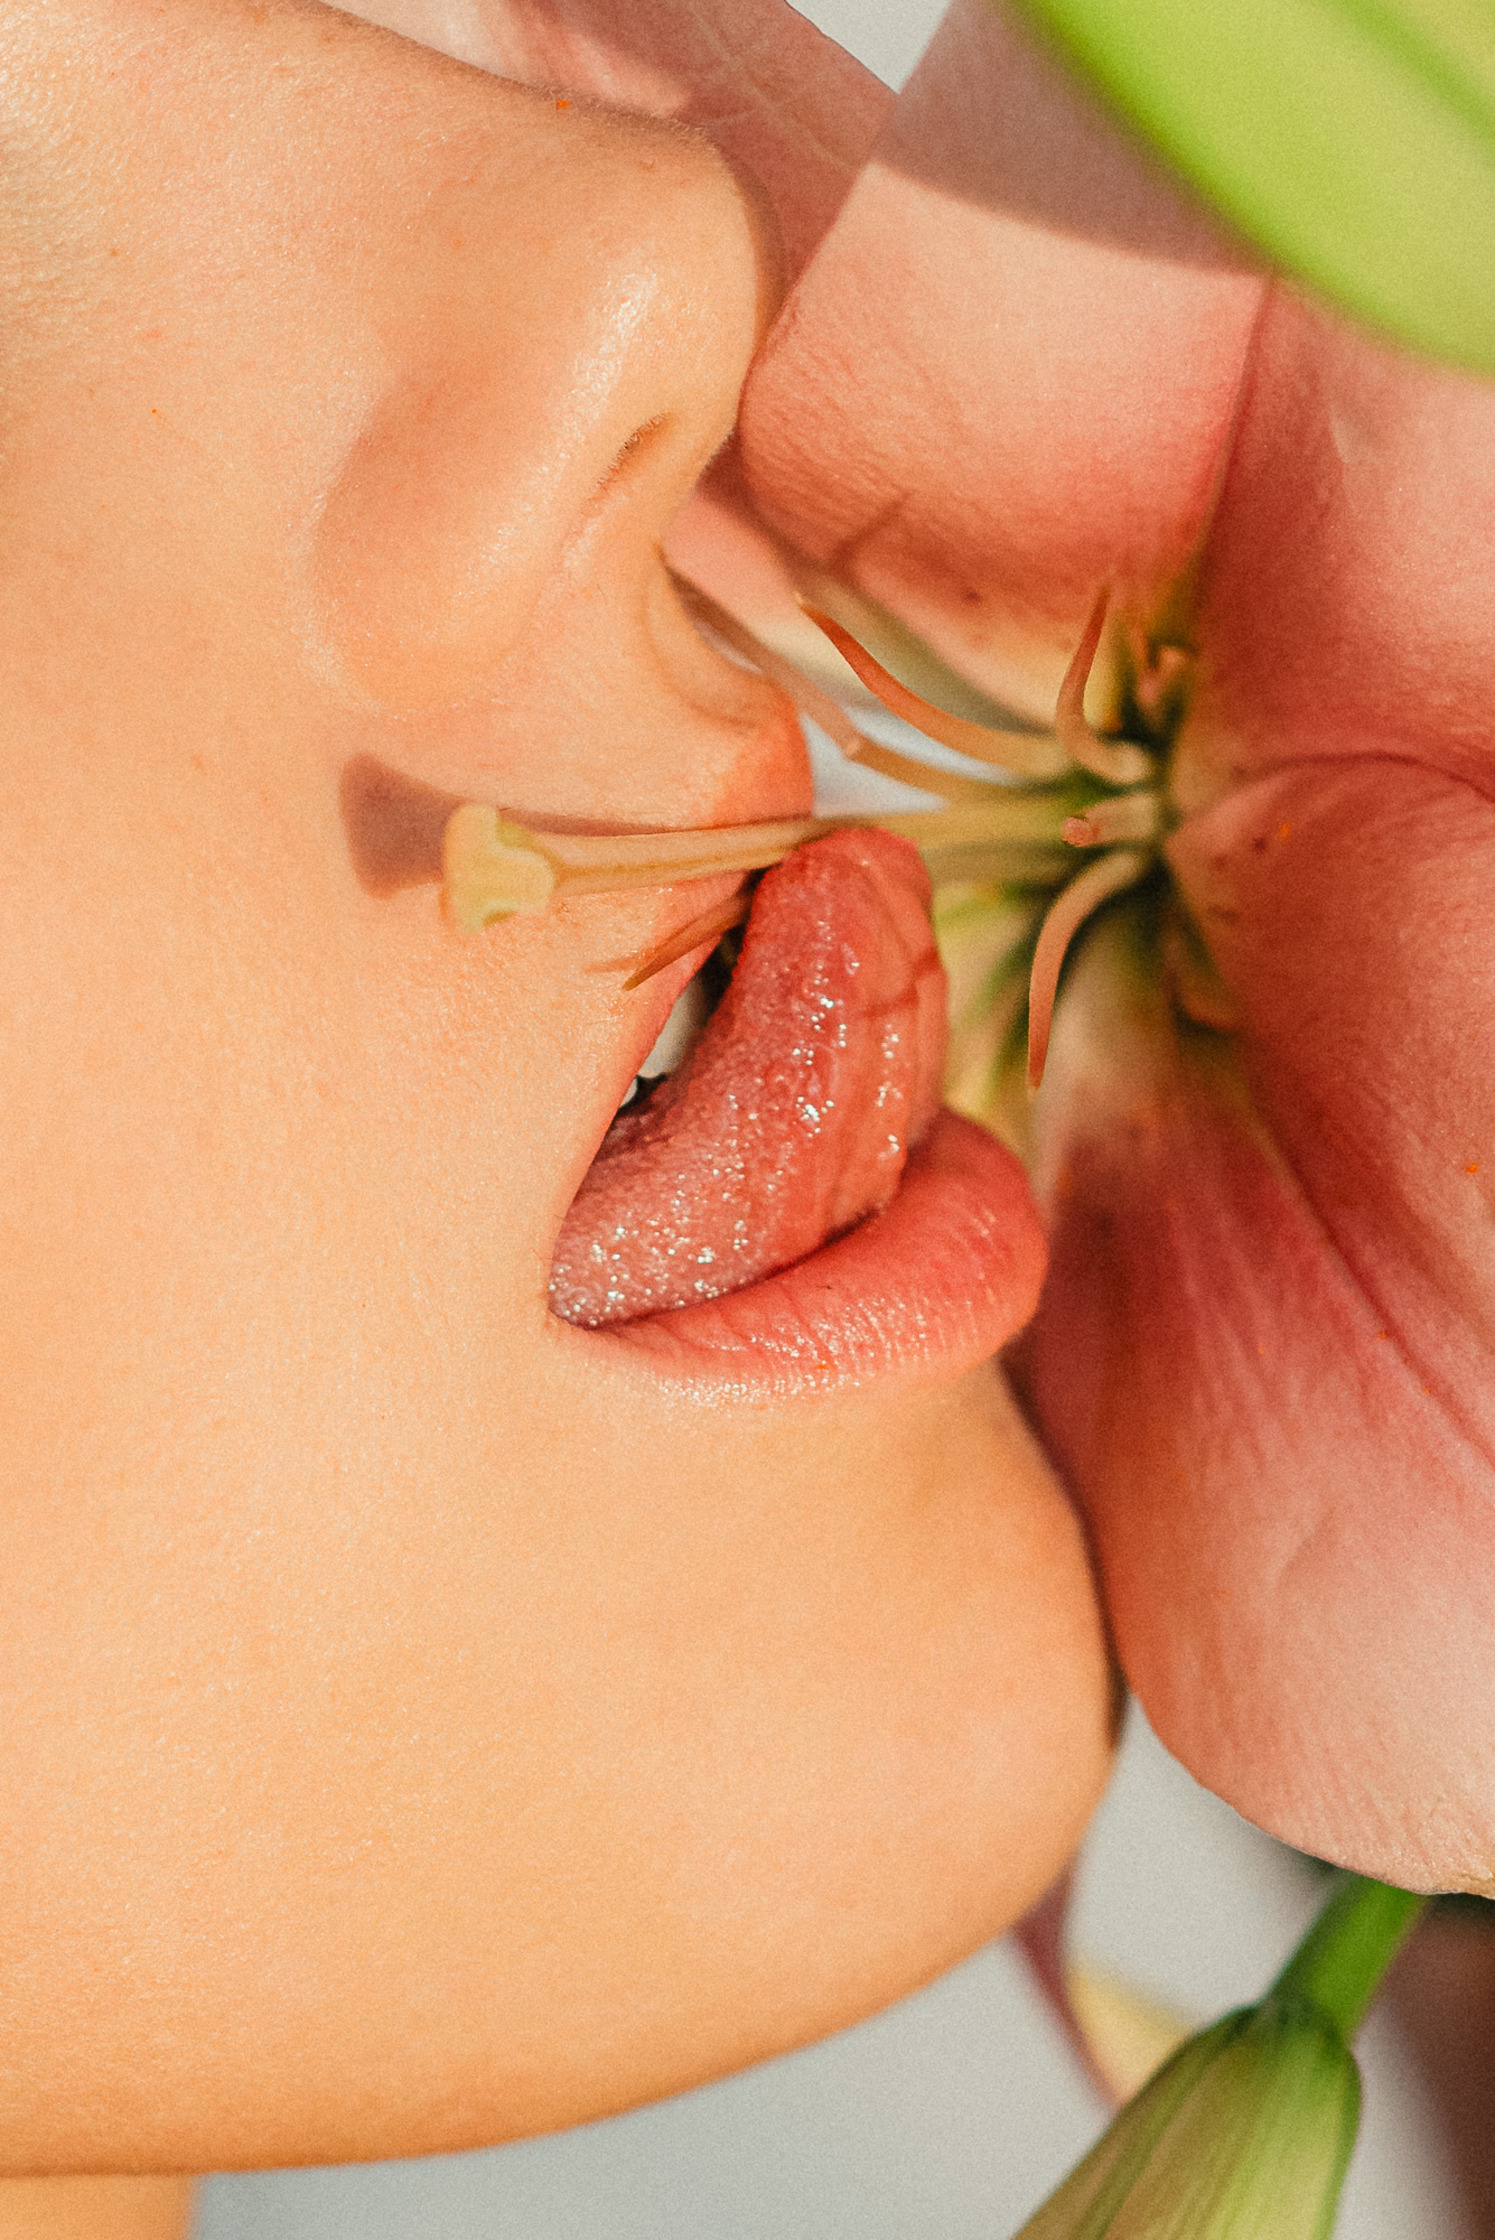 a woman is kissing and licking a flower